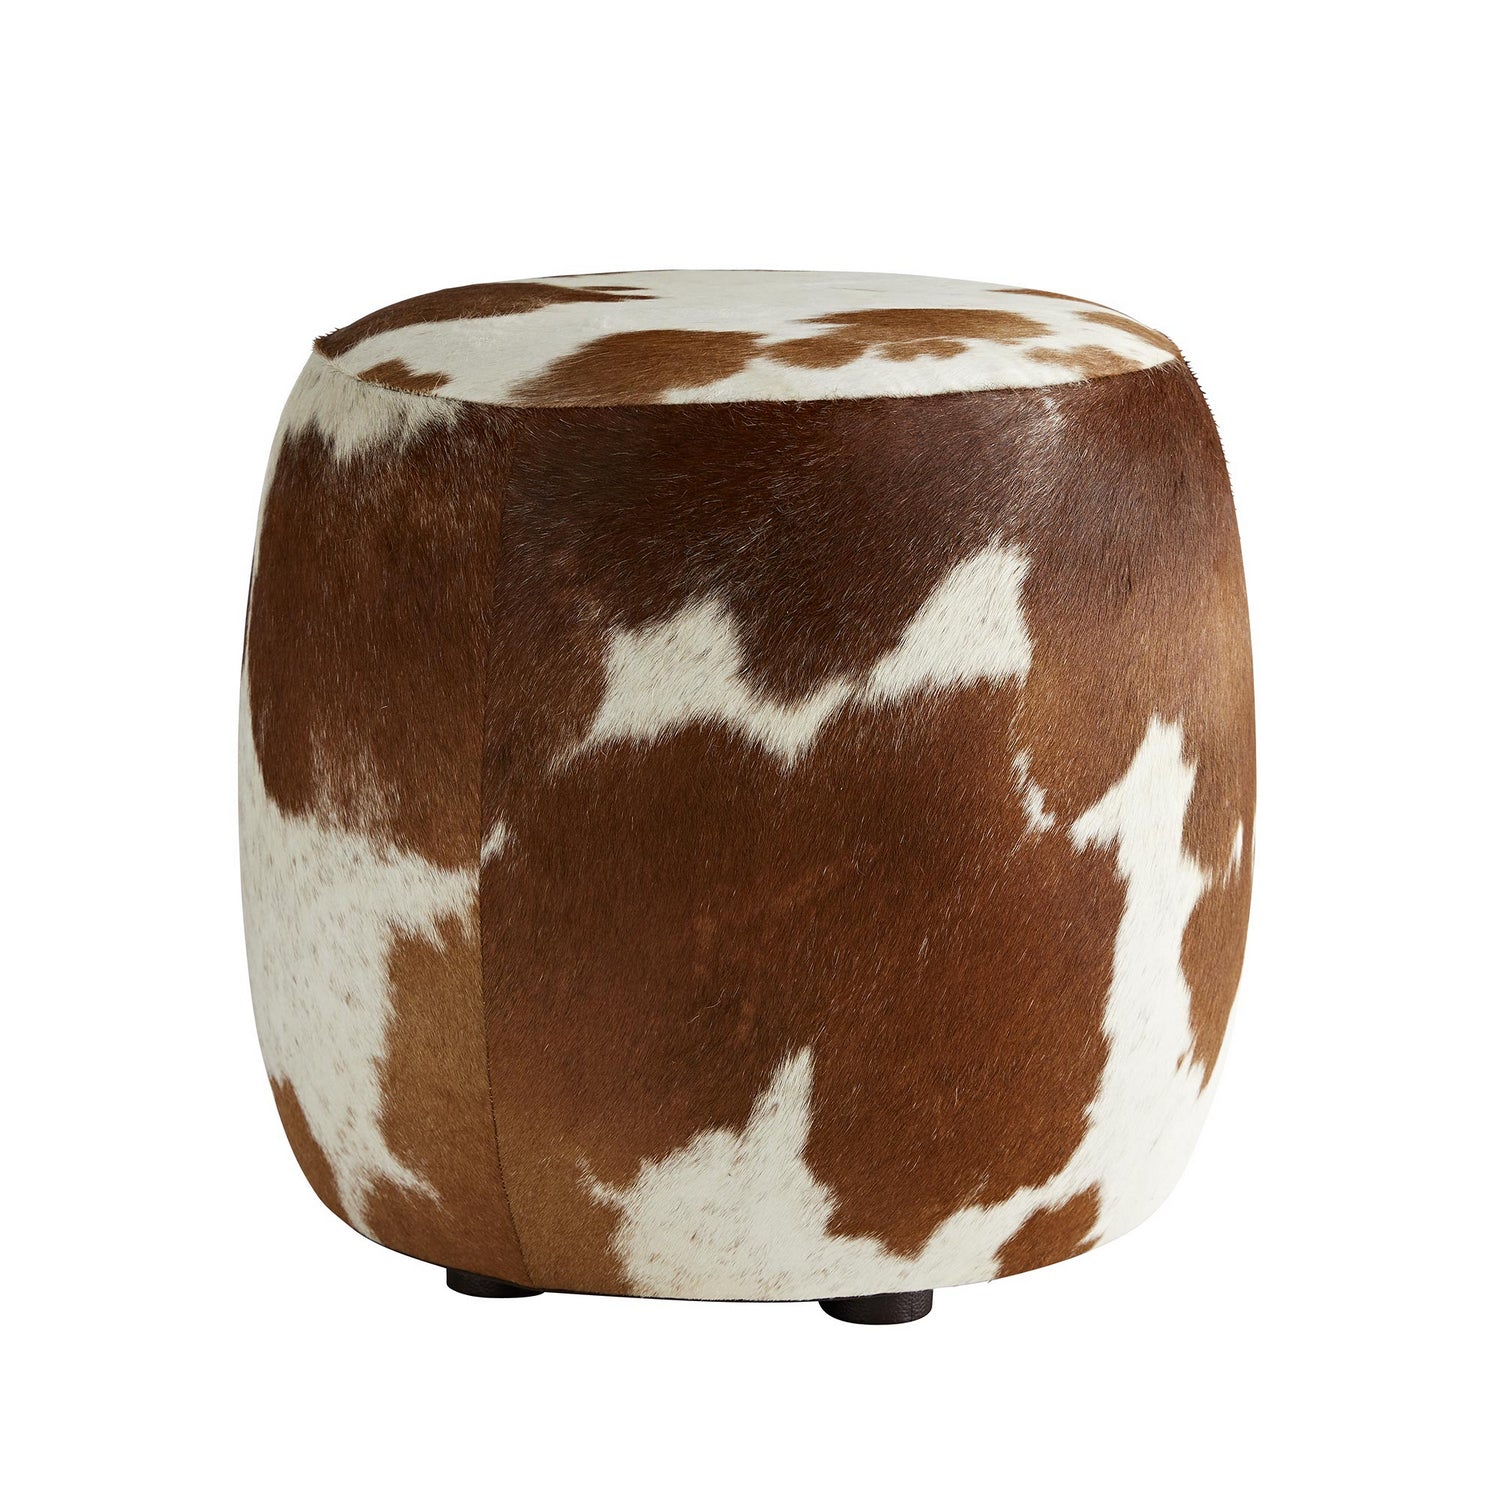 Ottoman from the Owen collection in Brown and White Hide finish